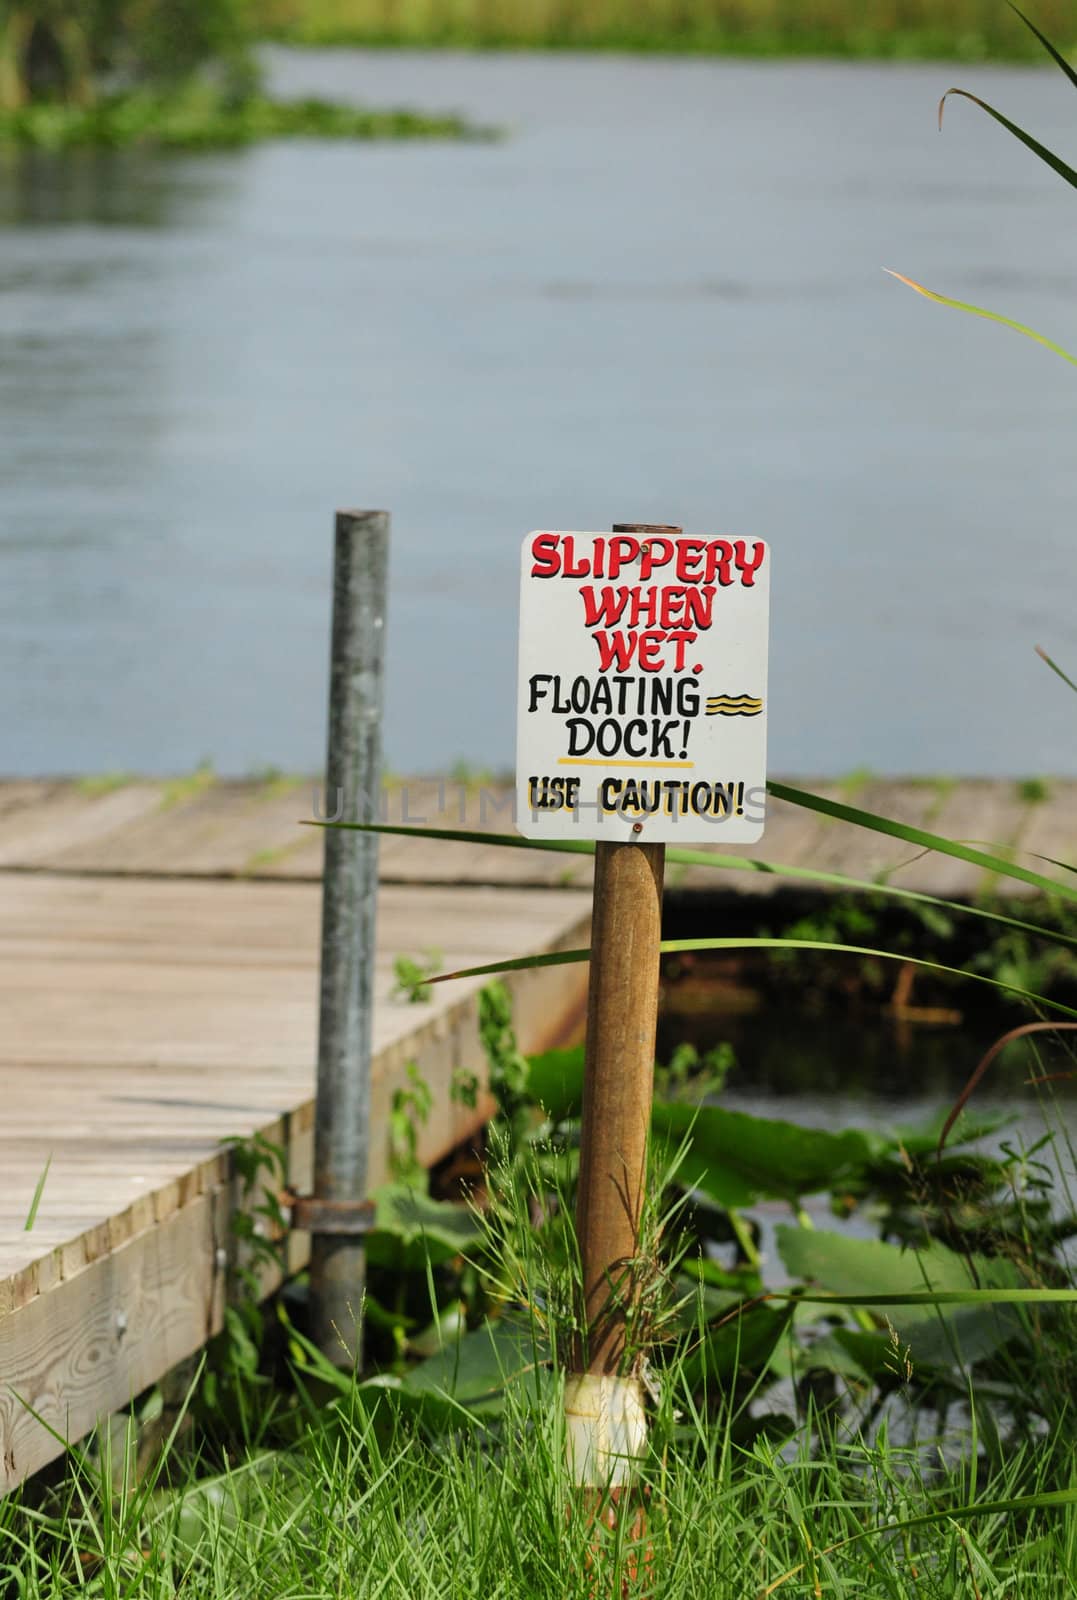 Slippery When Wet sign at dock near pond